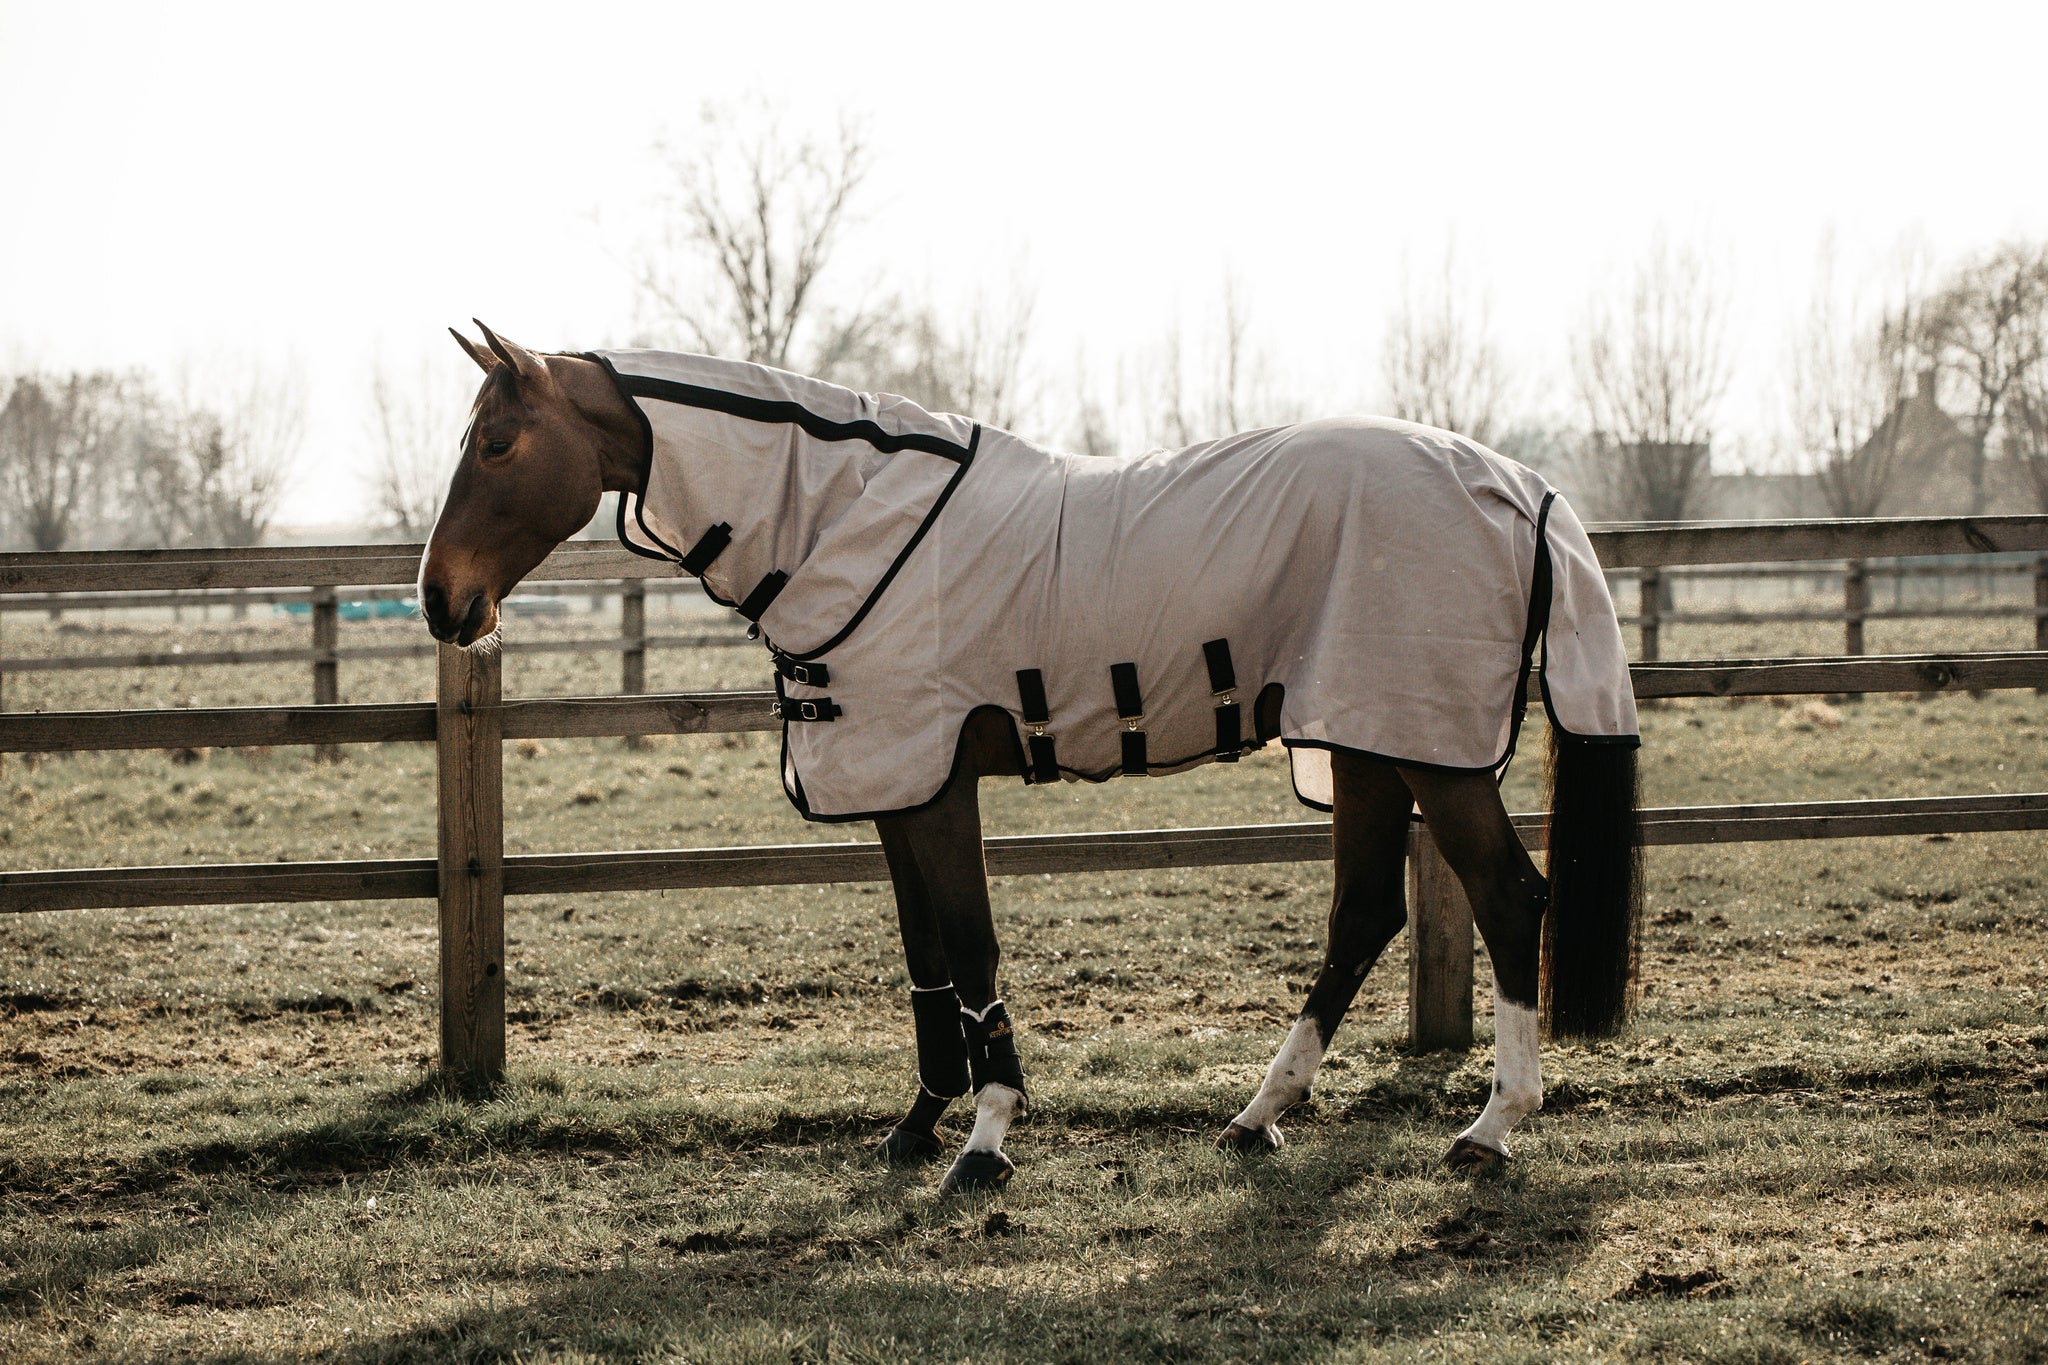 Get rid of any irritations caused by insects with the Kentucky Mesh Fly Rug.